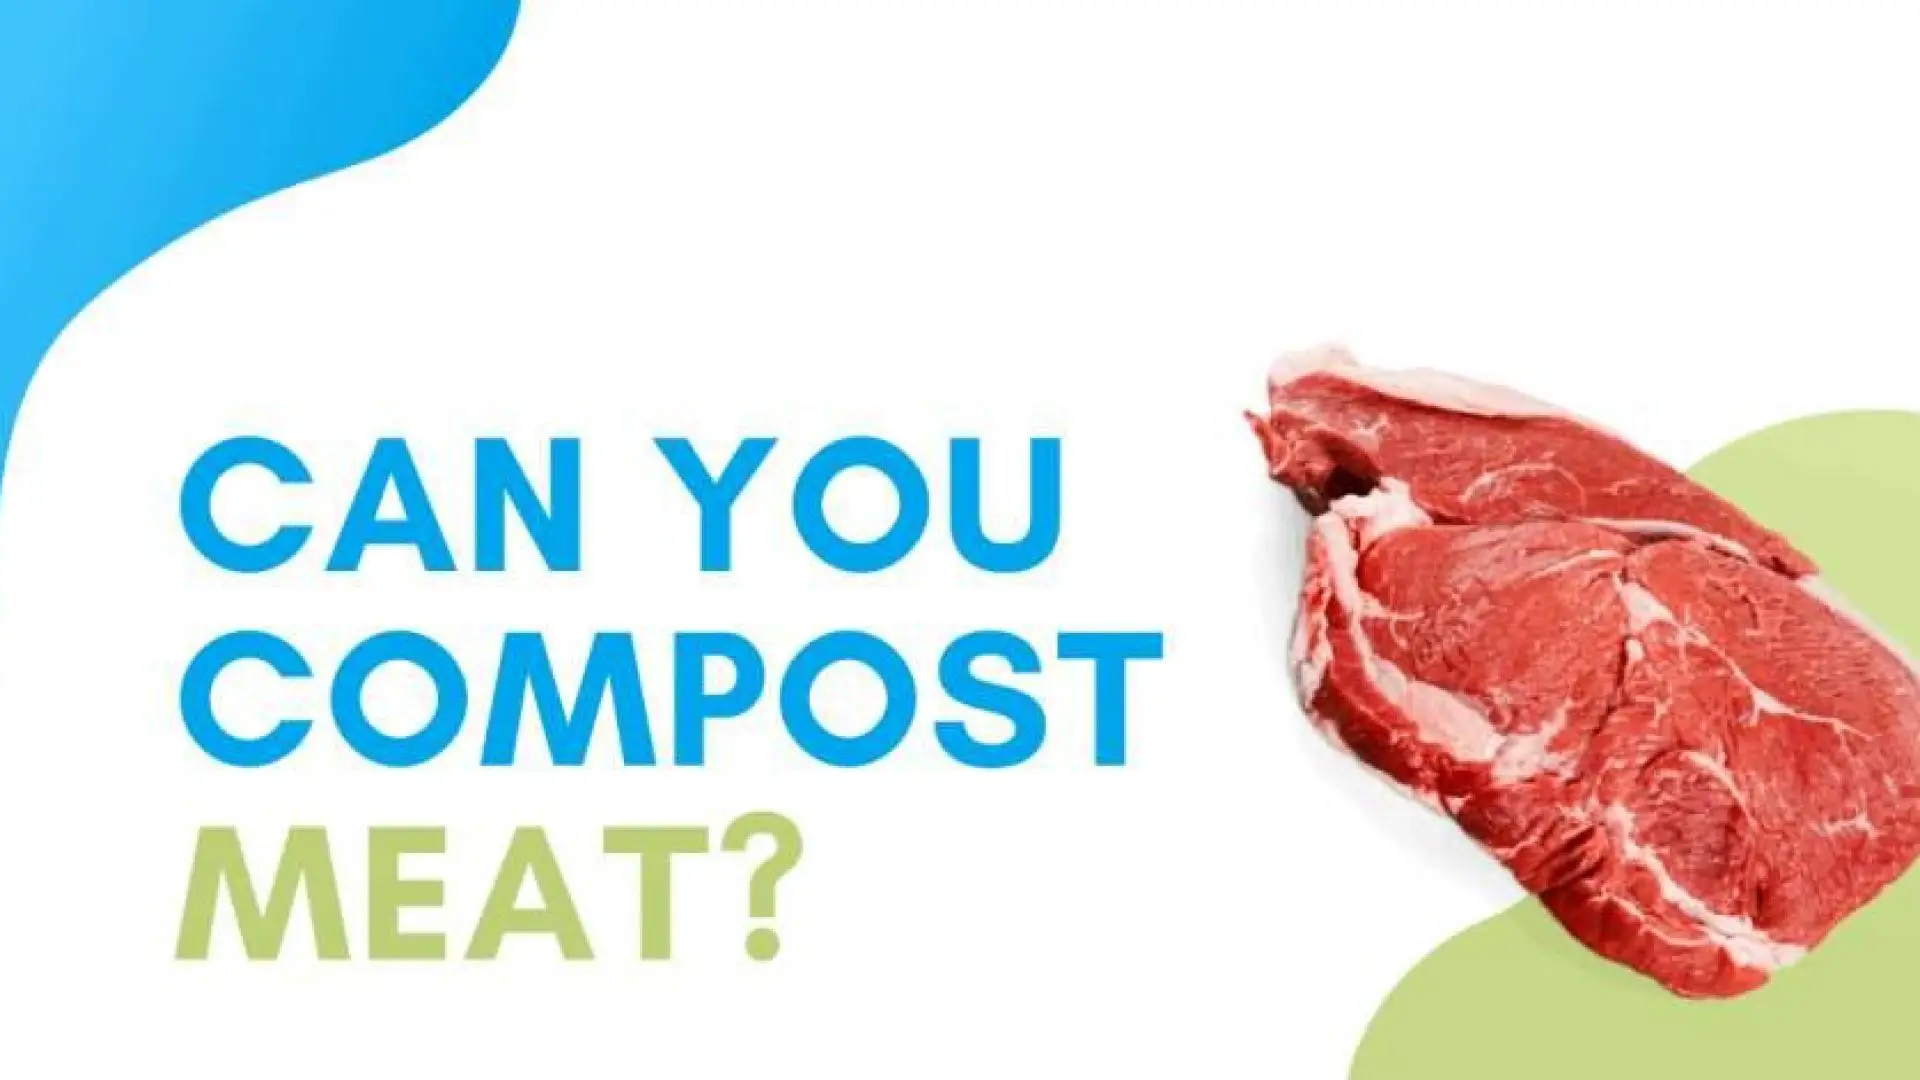 Can You Compost Meat?